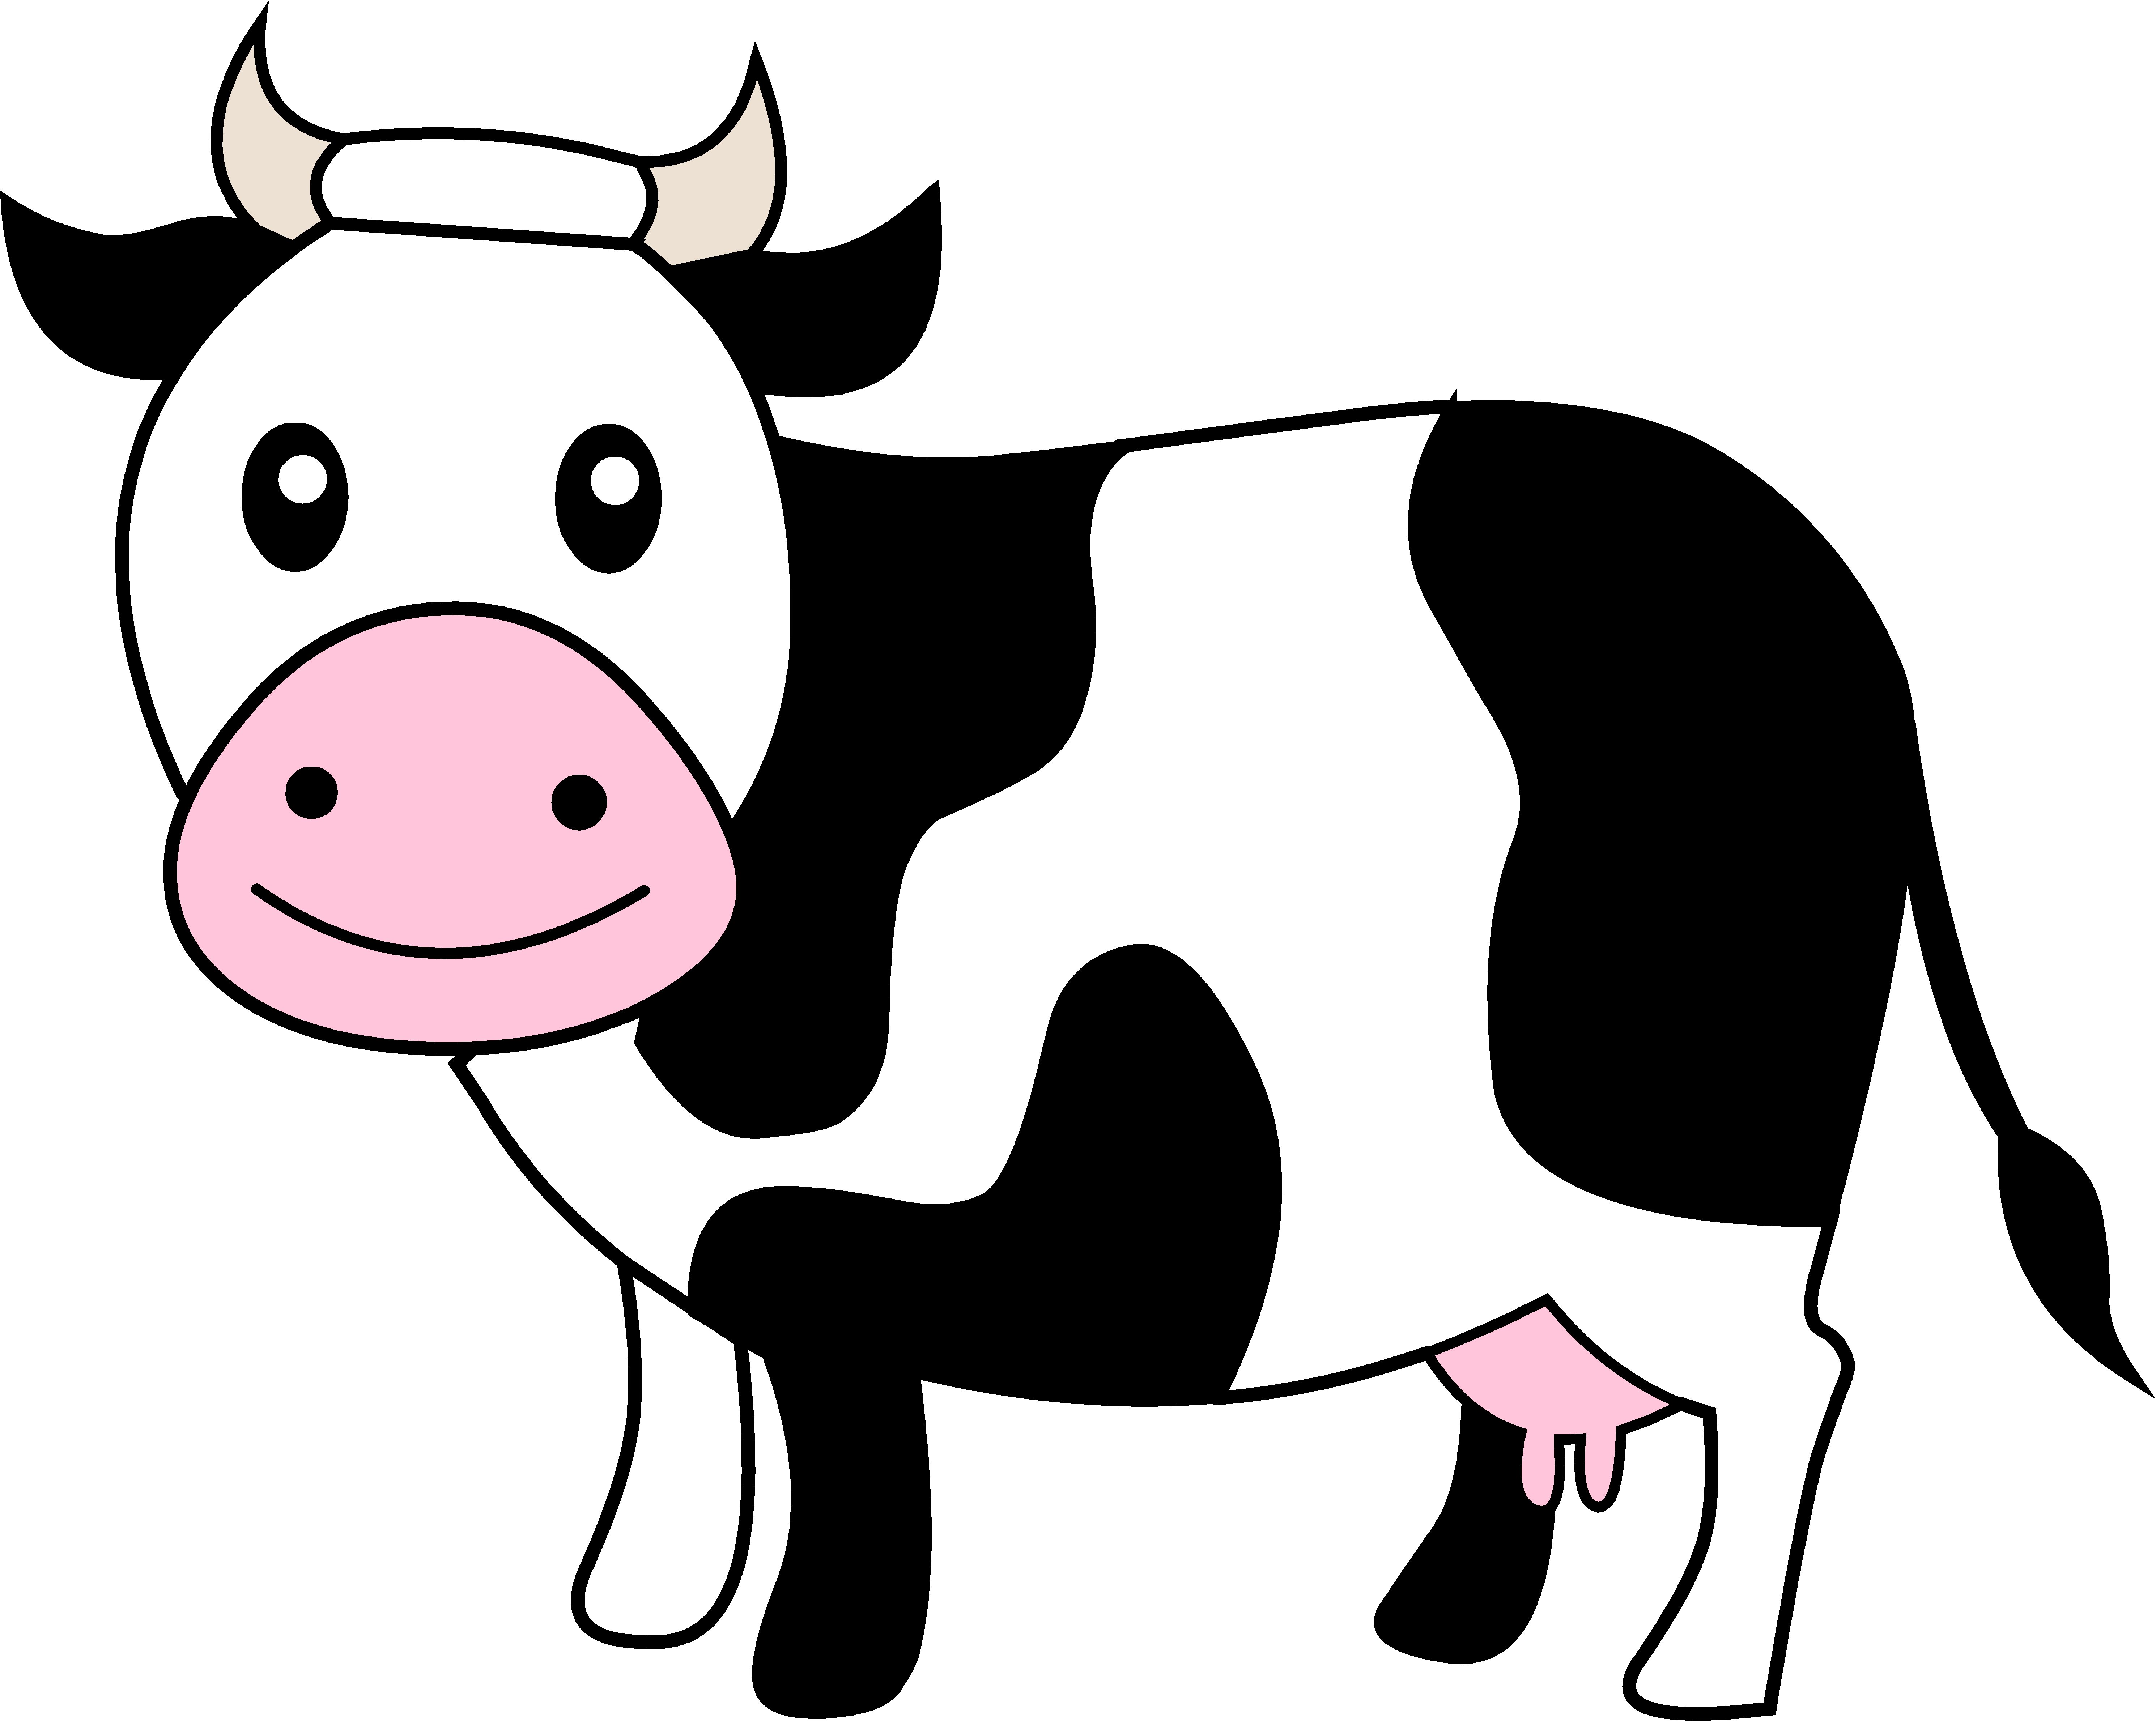 cow clip art free download - photo #31